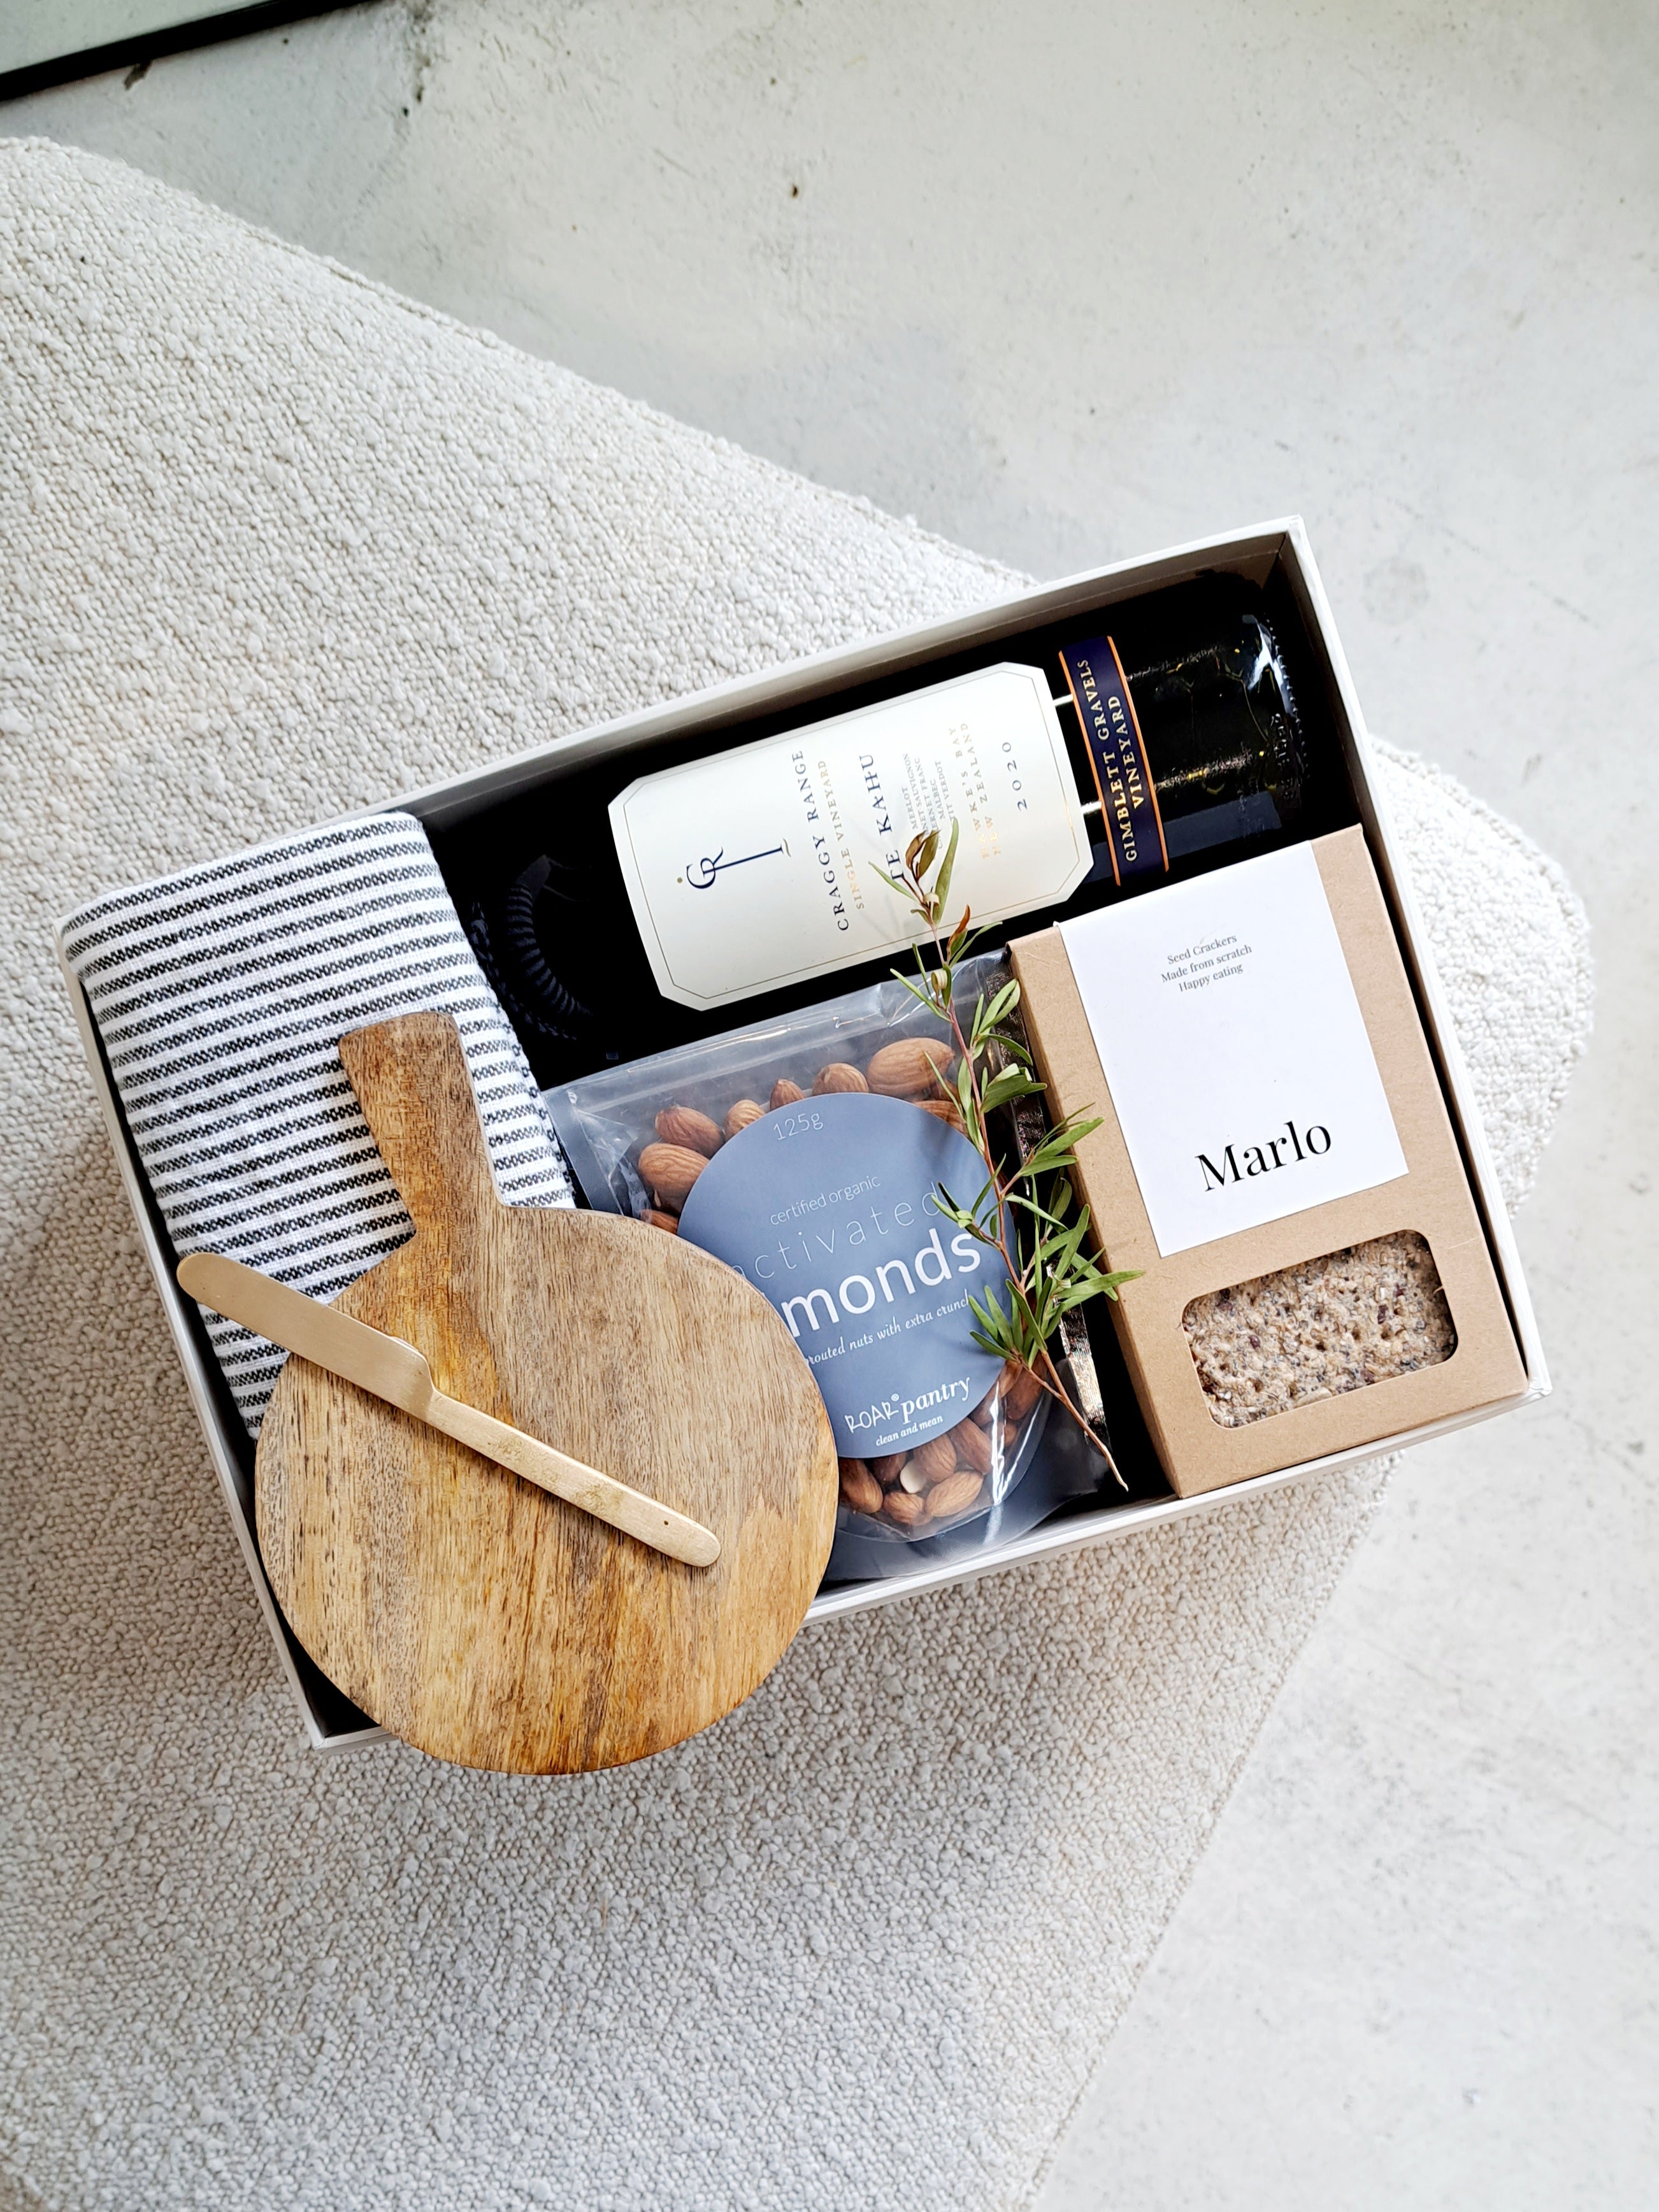 Luxury Gift Boxes and hampers delivered New Zealand wide. – Box and Bow